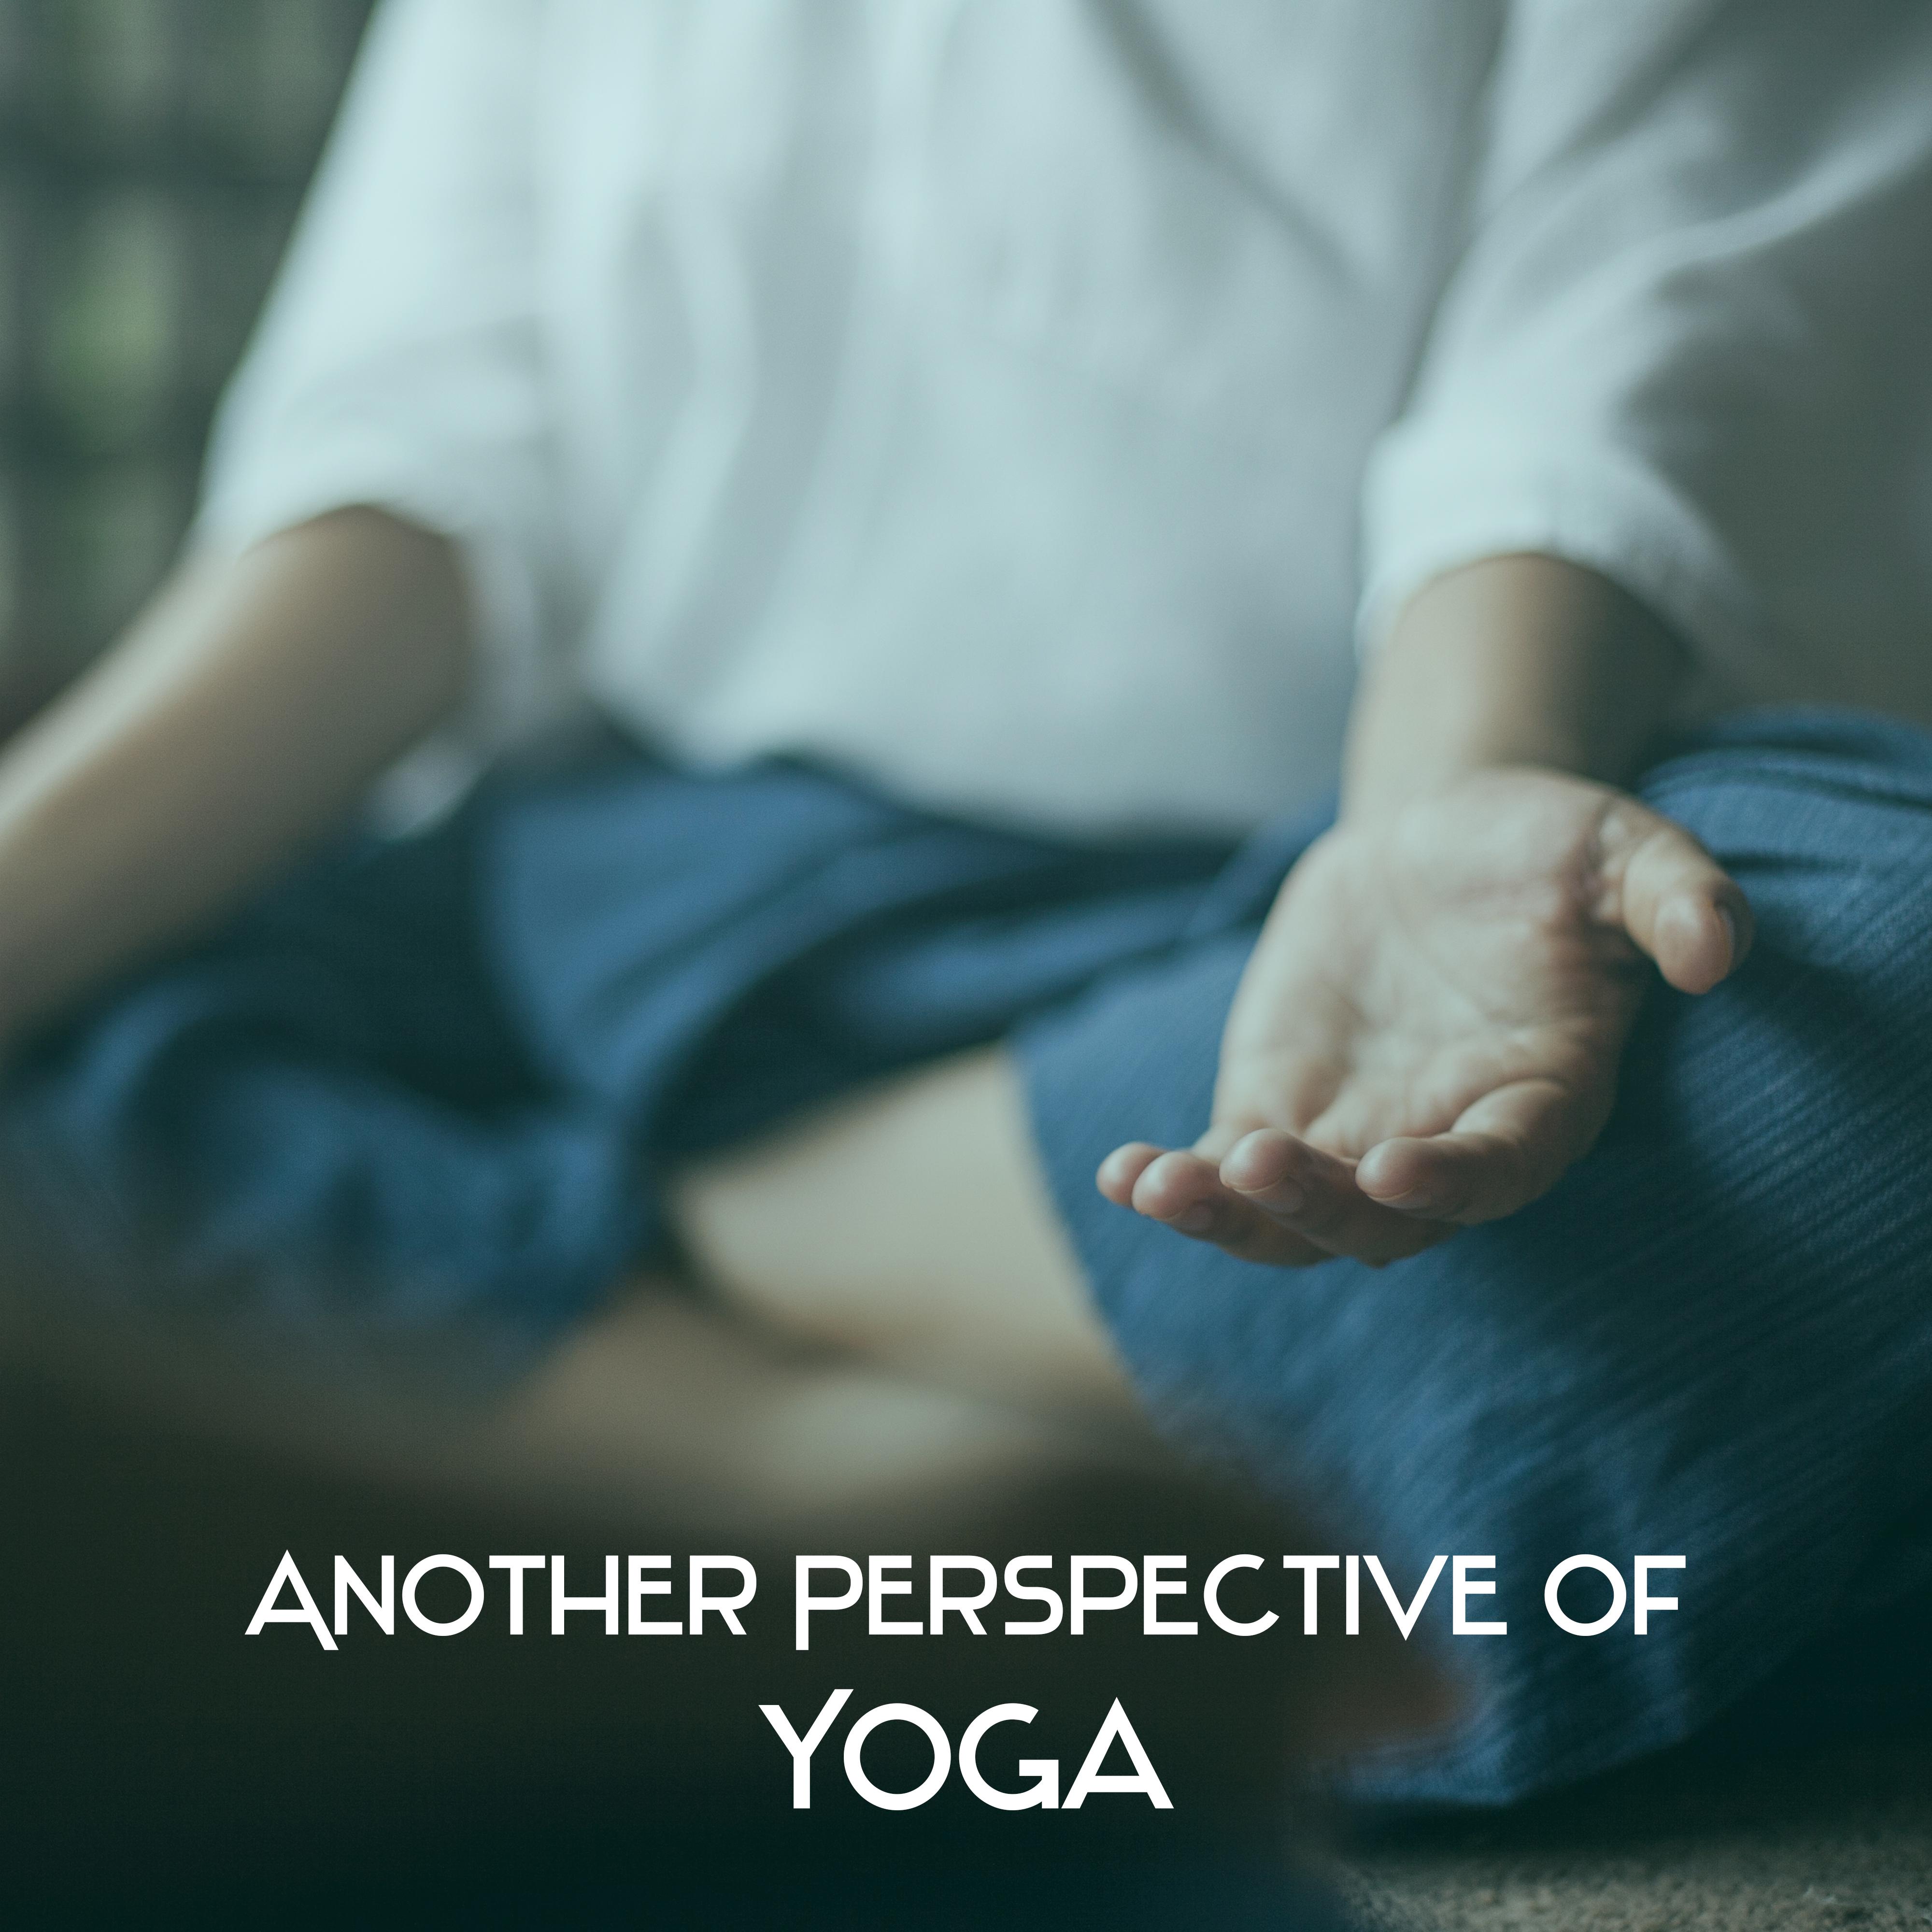 Another Perspective of Yoga - Wonderful Relaxation, Exercise Time, Lotus Position, Stretching Body